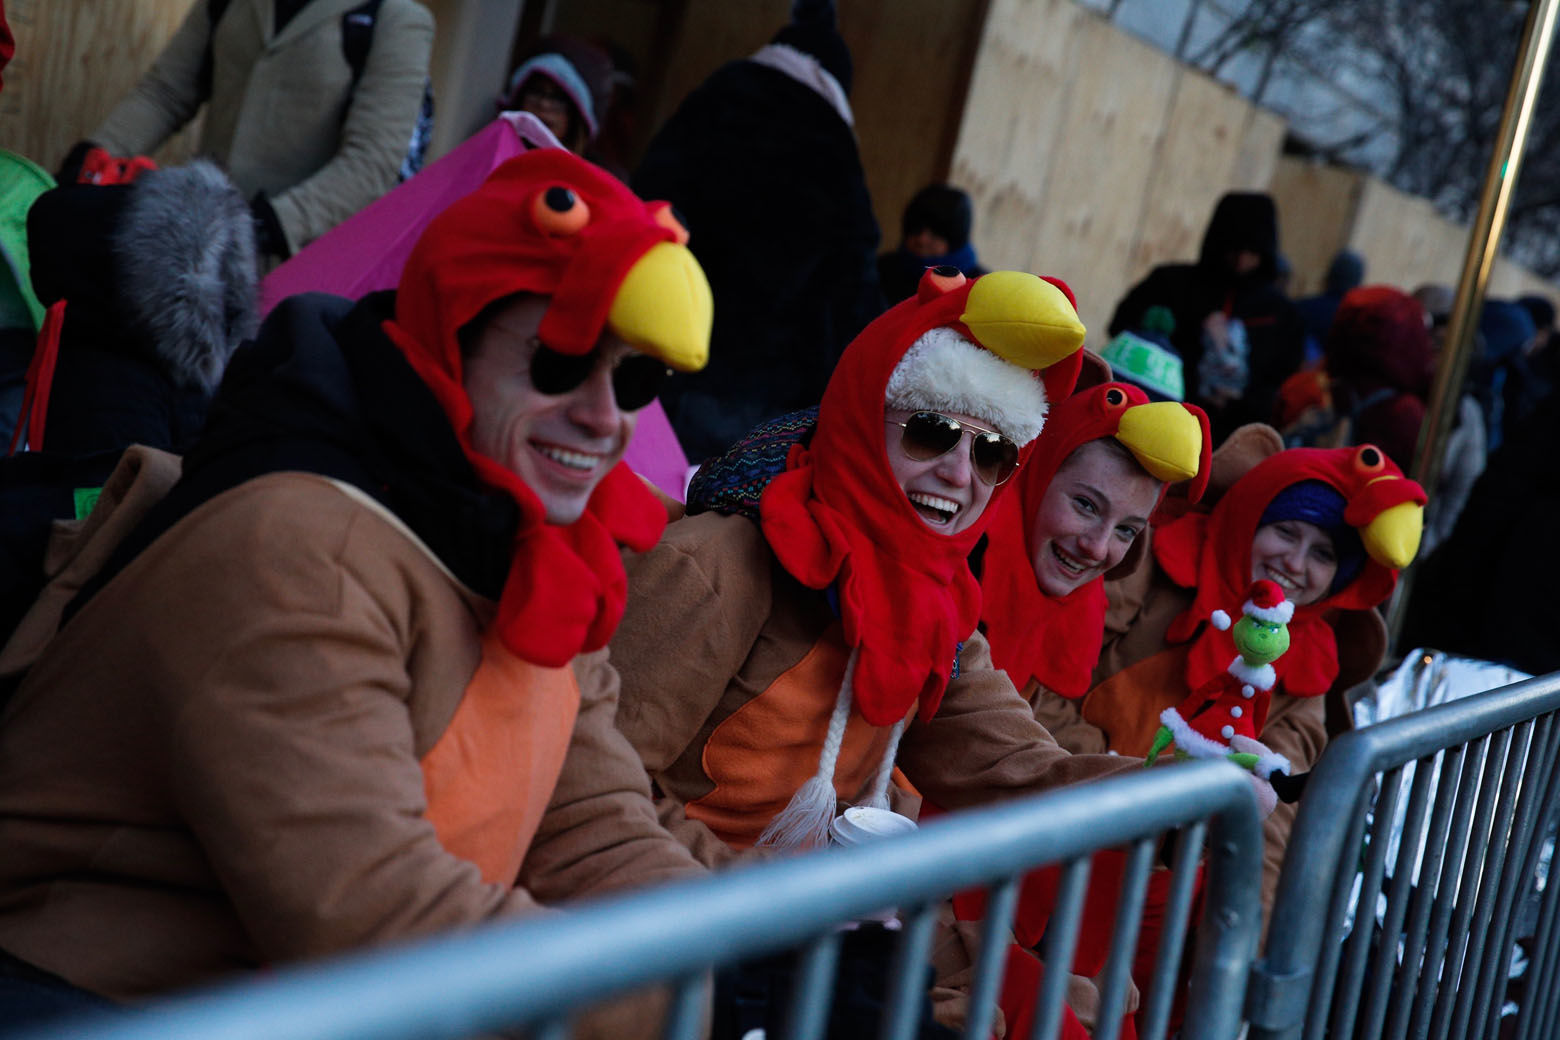 People try to stay warm before the 92nd annual Macy's Thanksgiving Day Parade in New York, Thursday, Nov. 22, 2018. (AP Photo/Eduardo Munoz Alvarez)